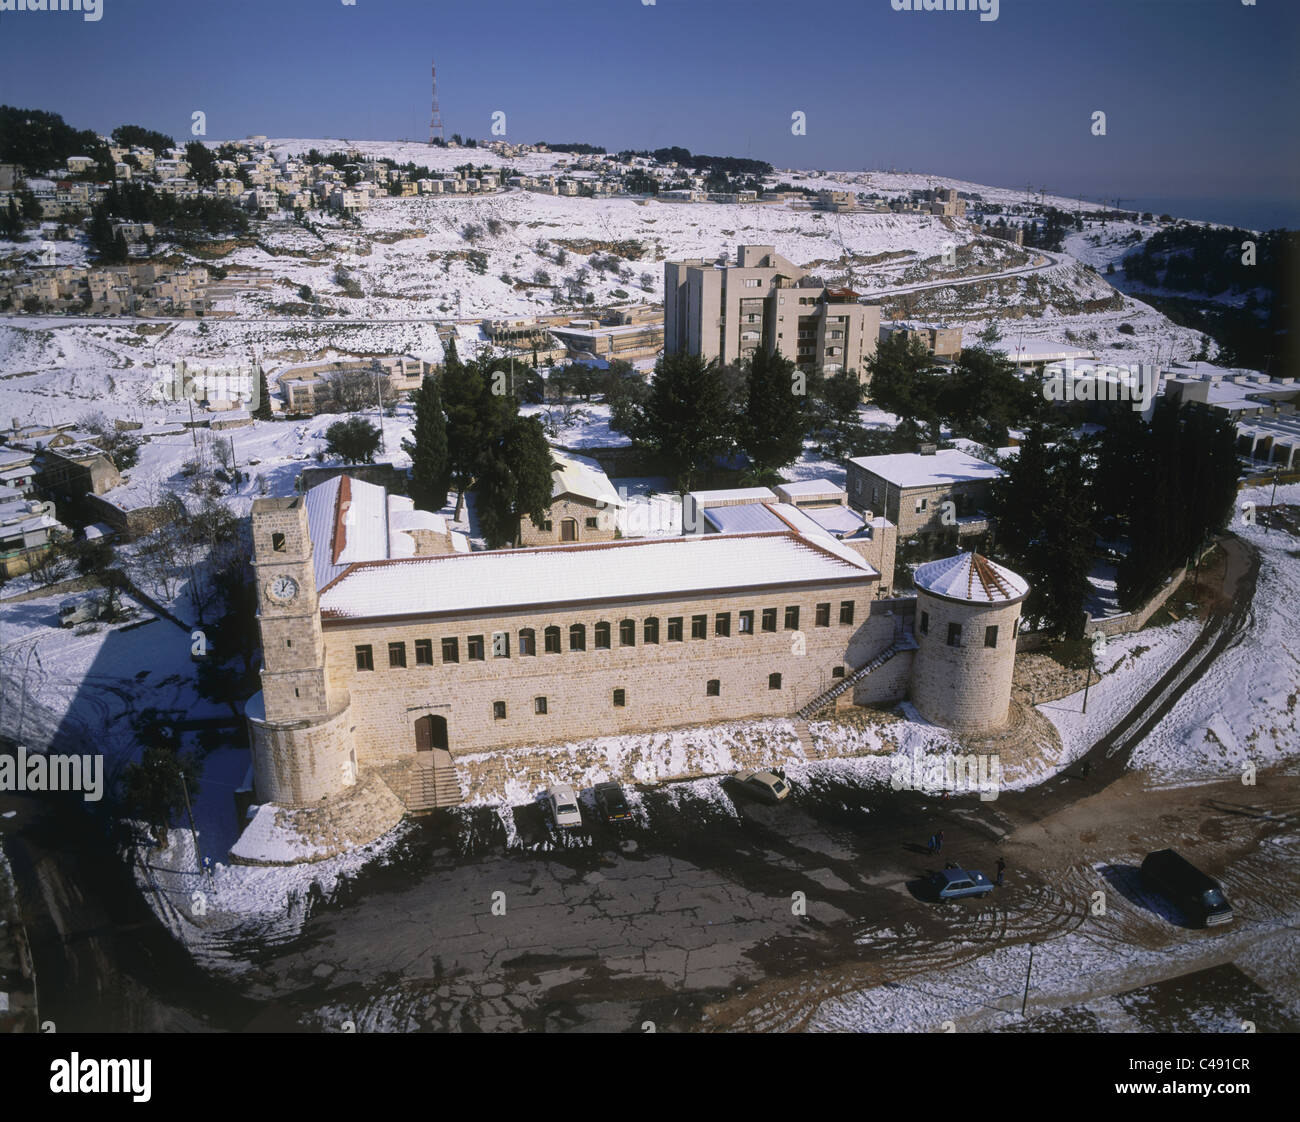 Aerial photograph of the old city of Zefat in thr Upper Galilee after snow storm Stock Photo